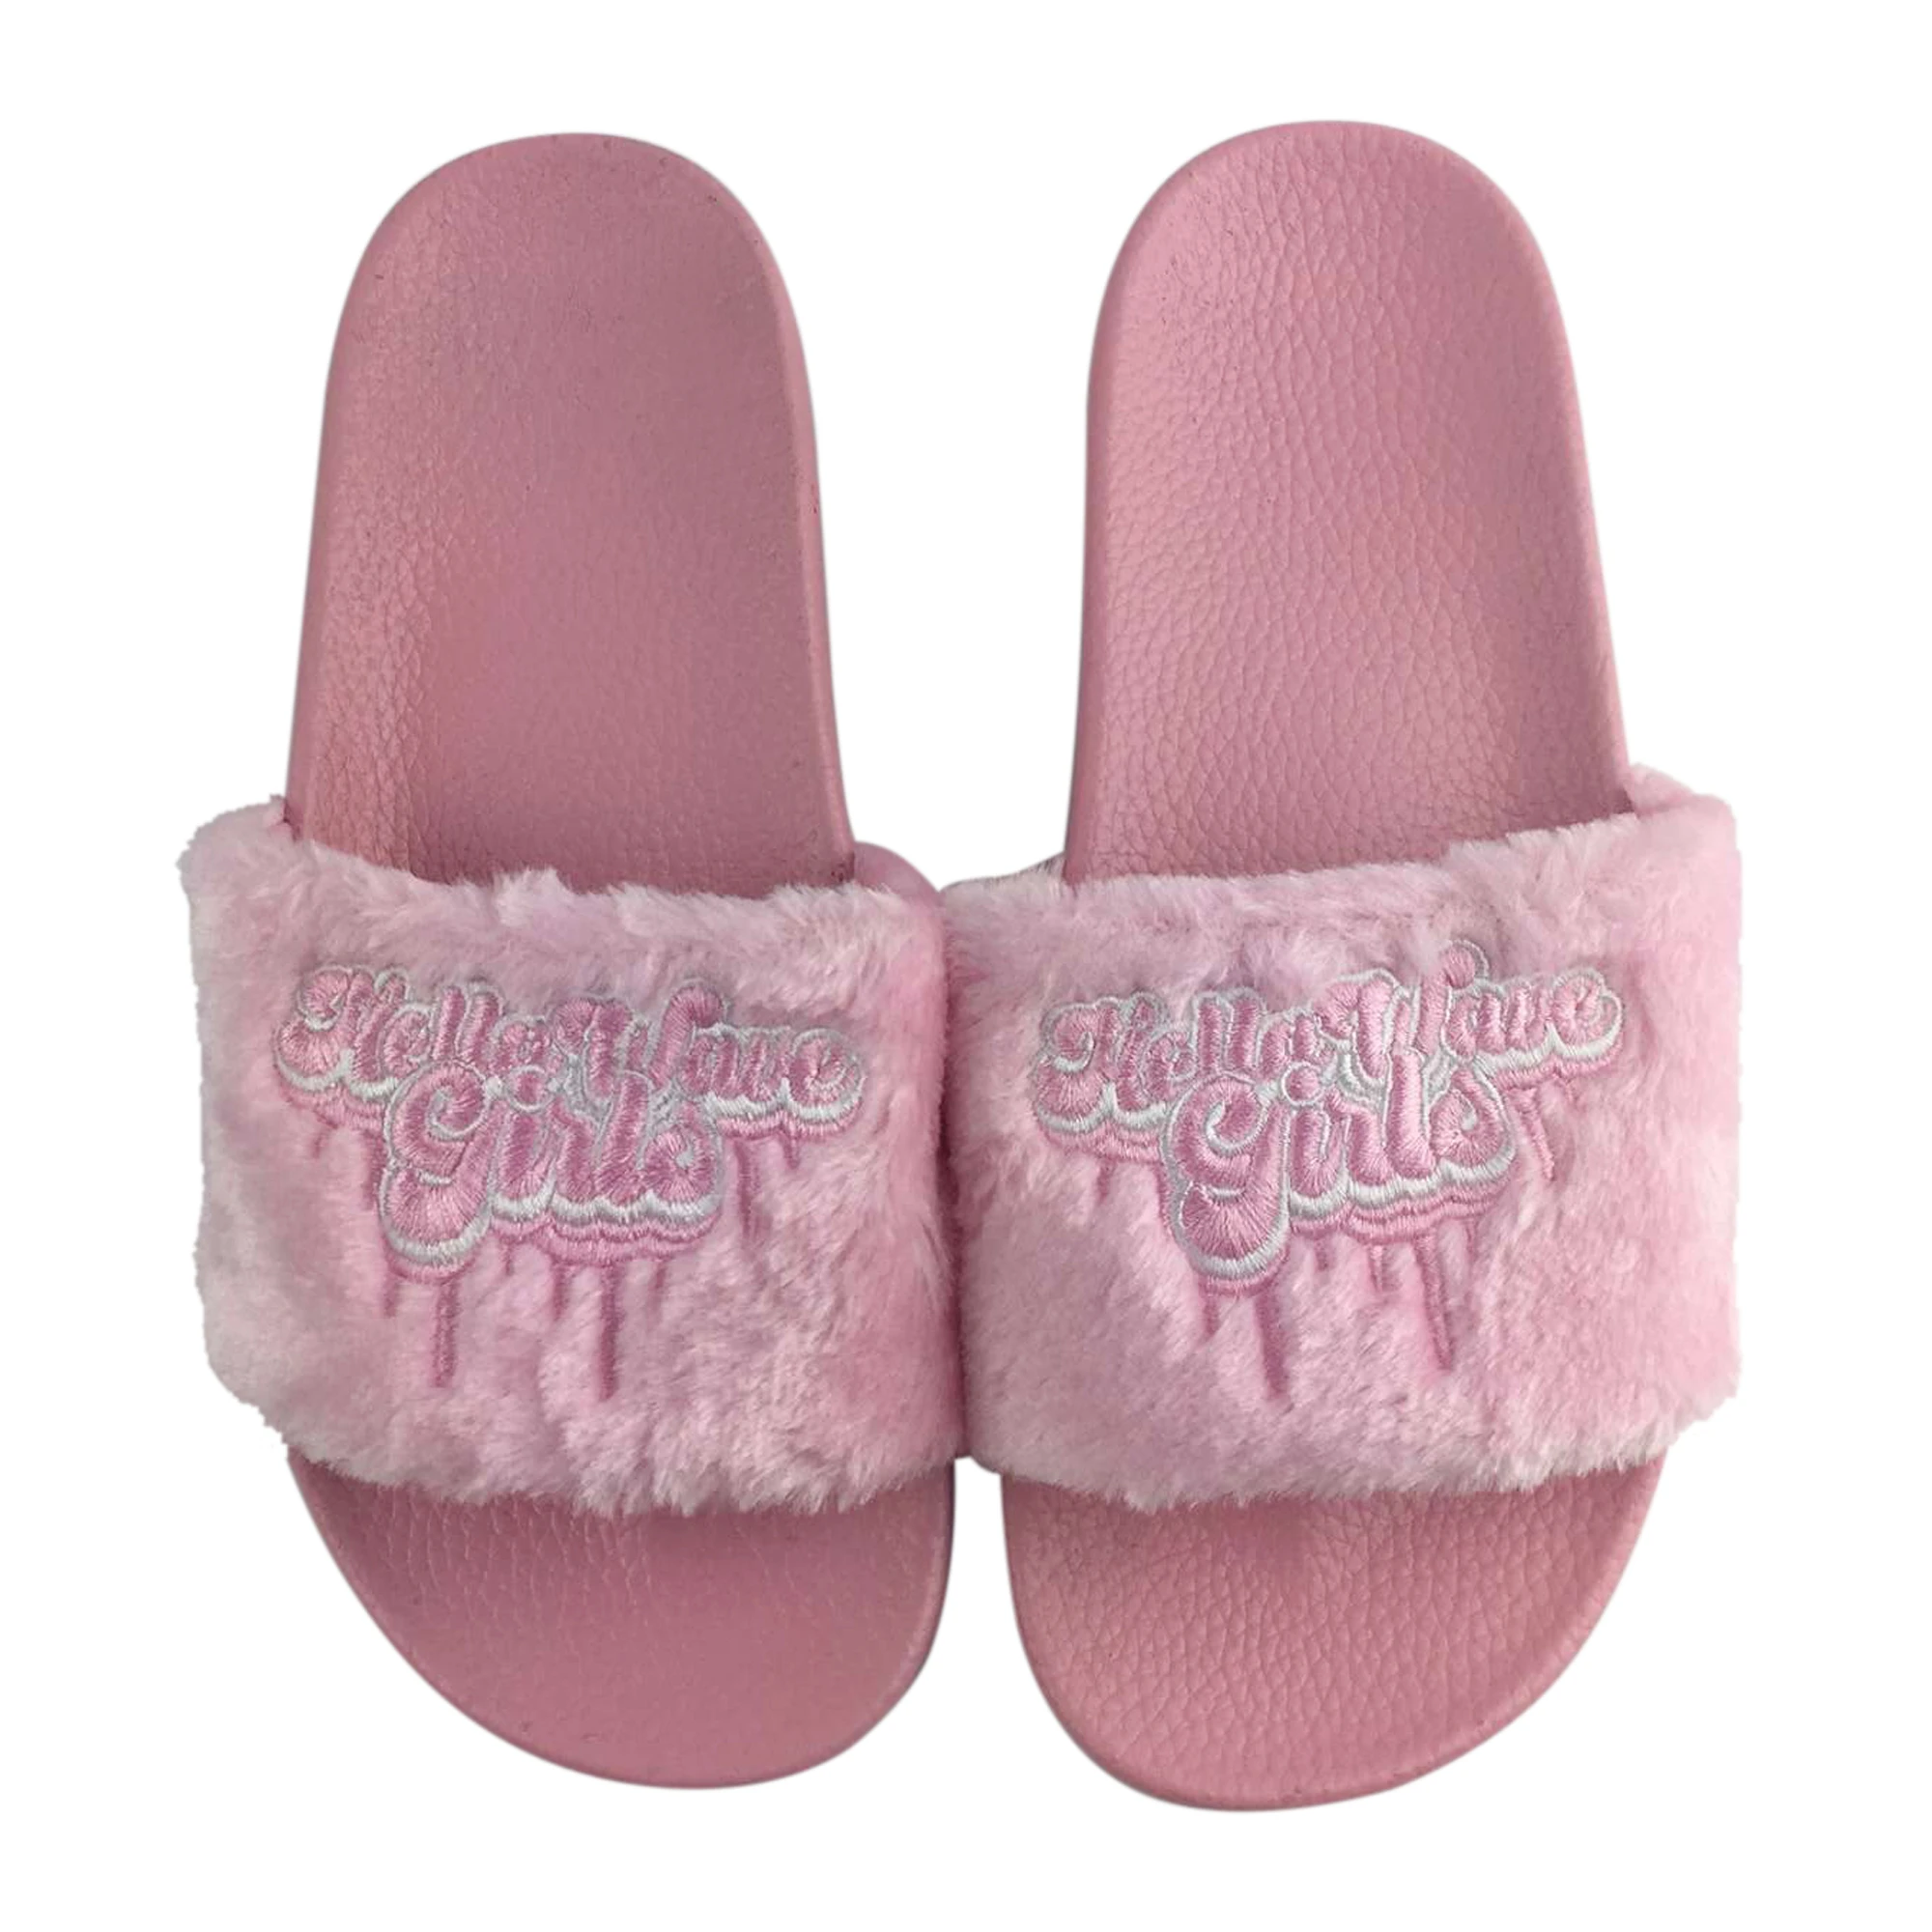 Great shoes 2021 designer Home slippers famous brands Flip Flops Fluffy Slippers Fur sandals for women and ladies